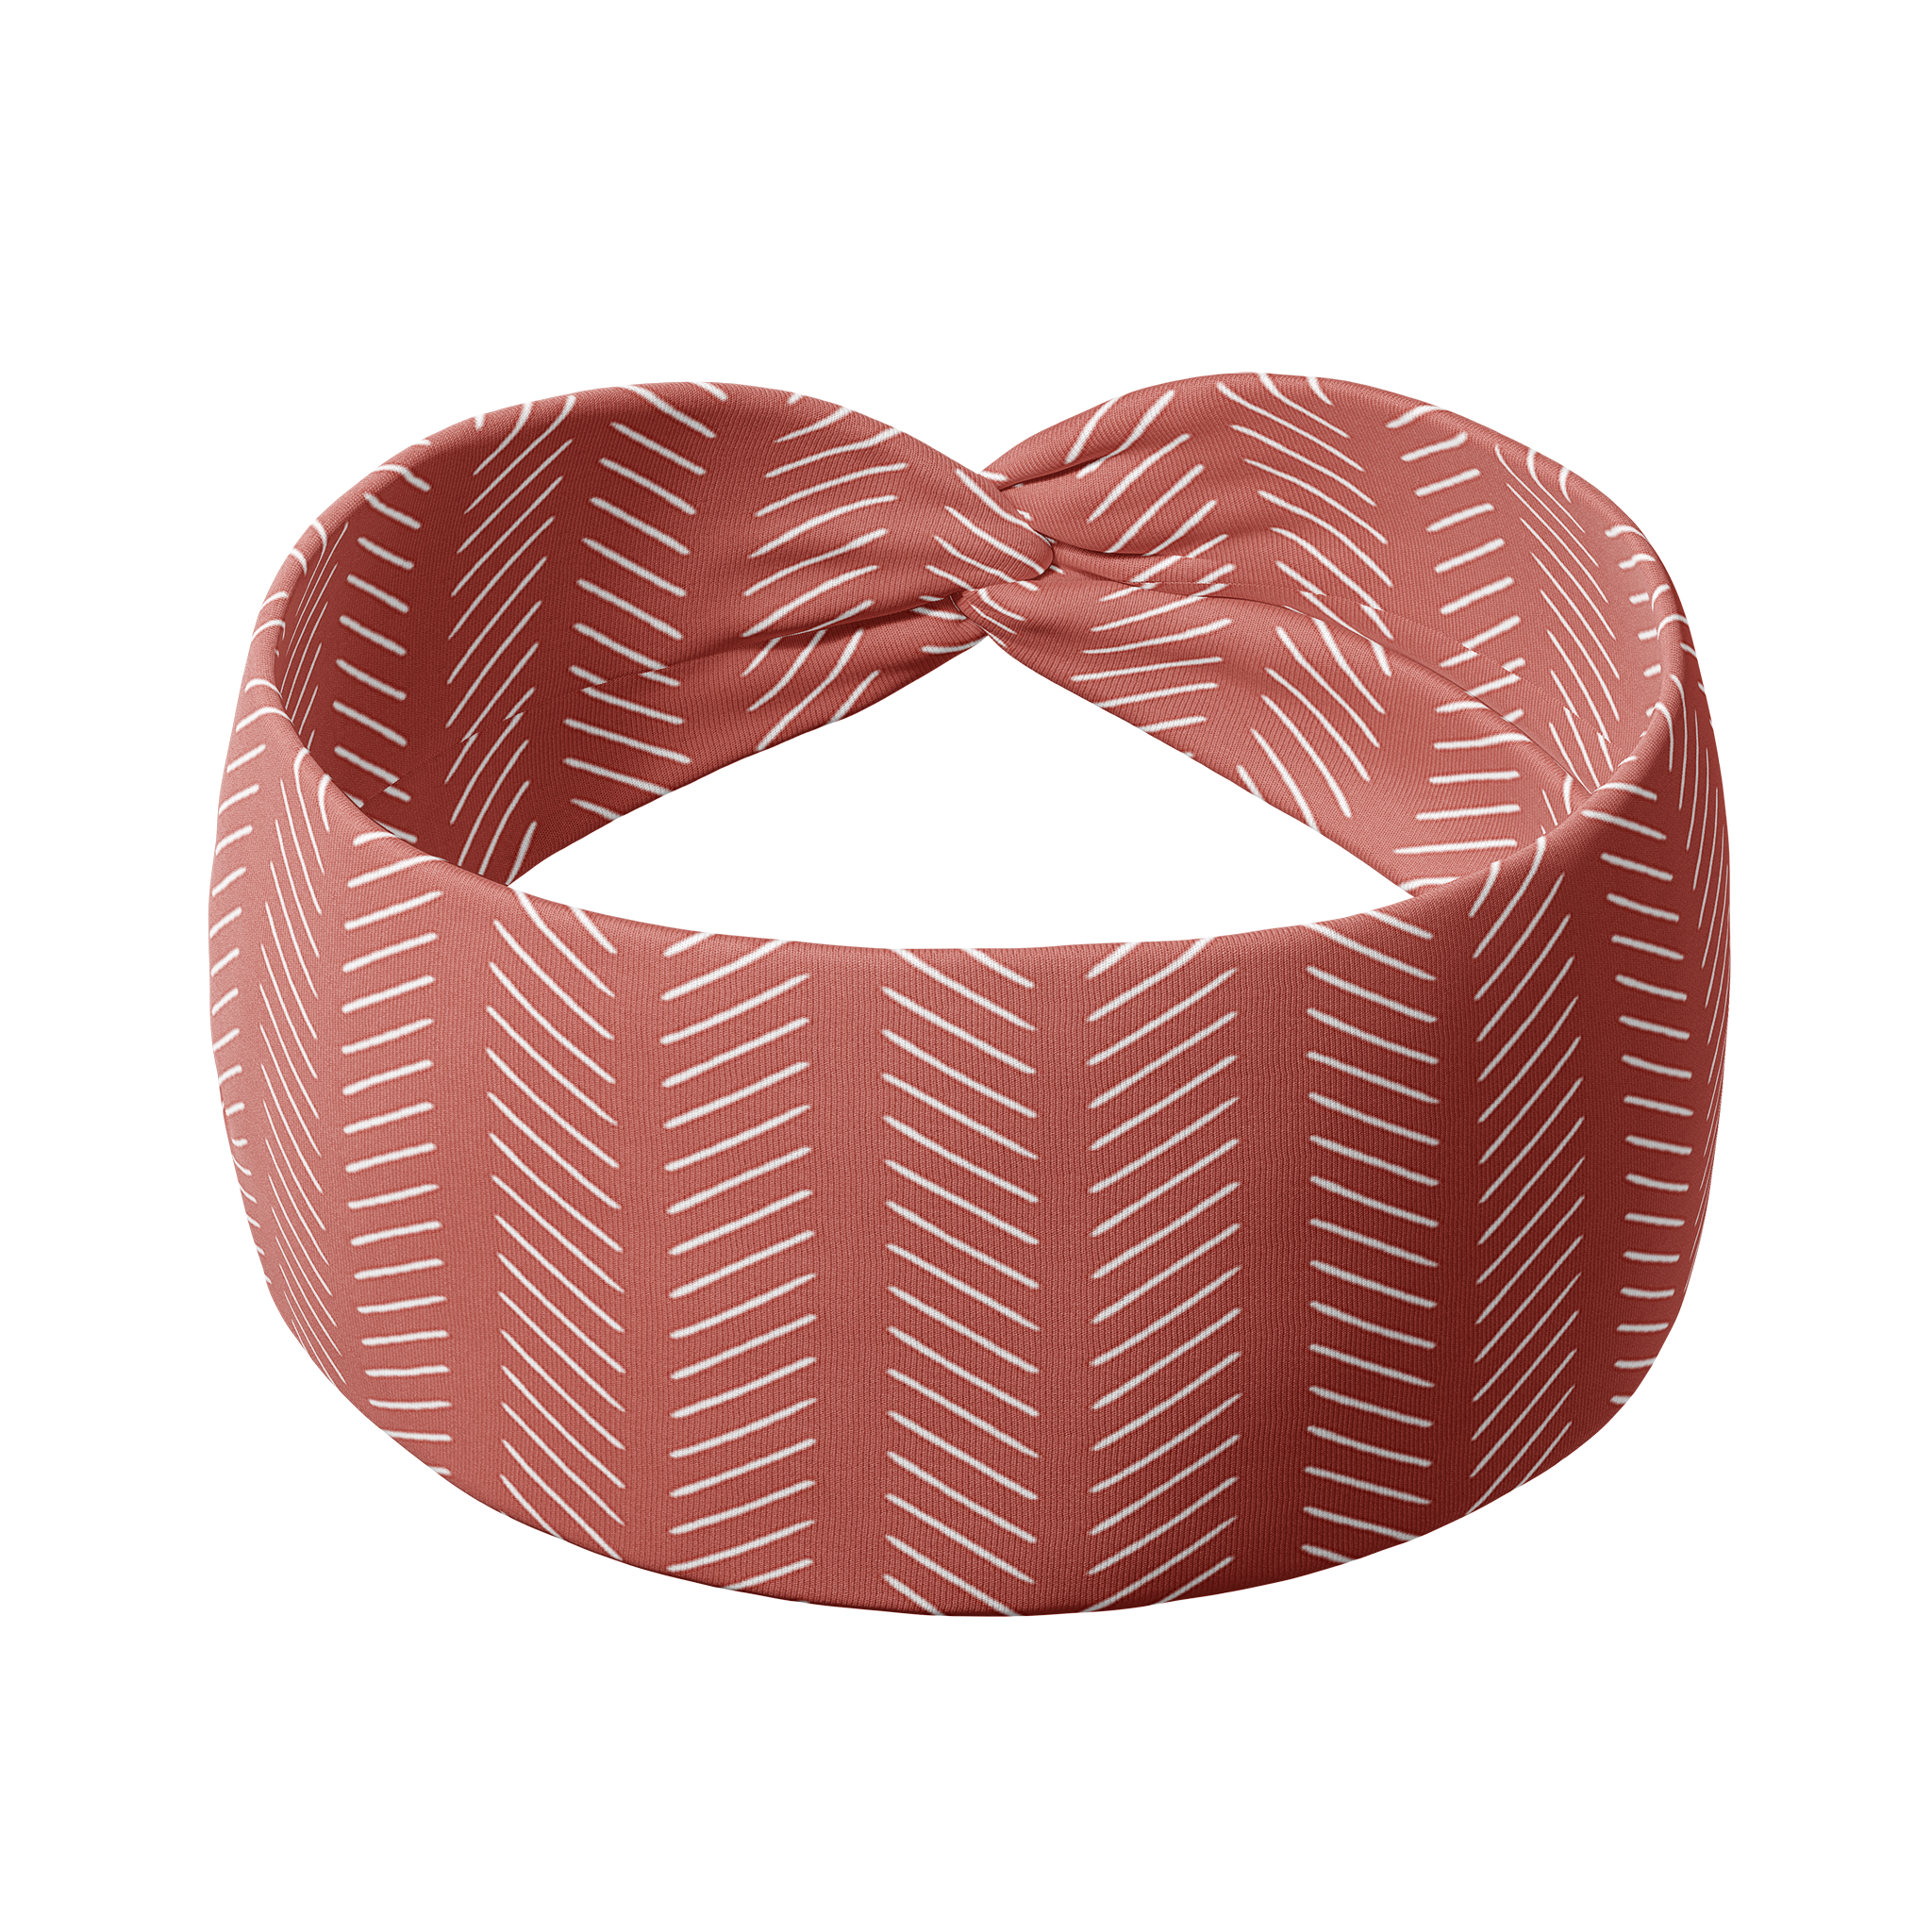 Adult women's coral headband with white slanted lines